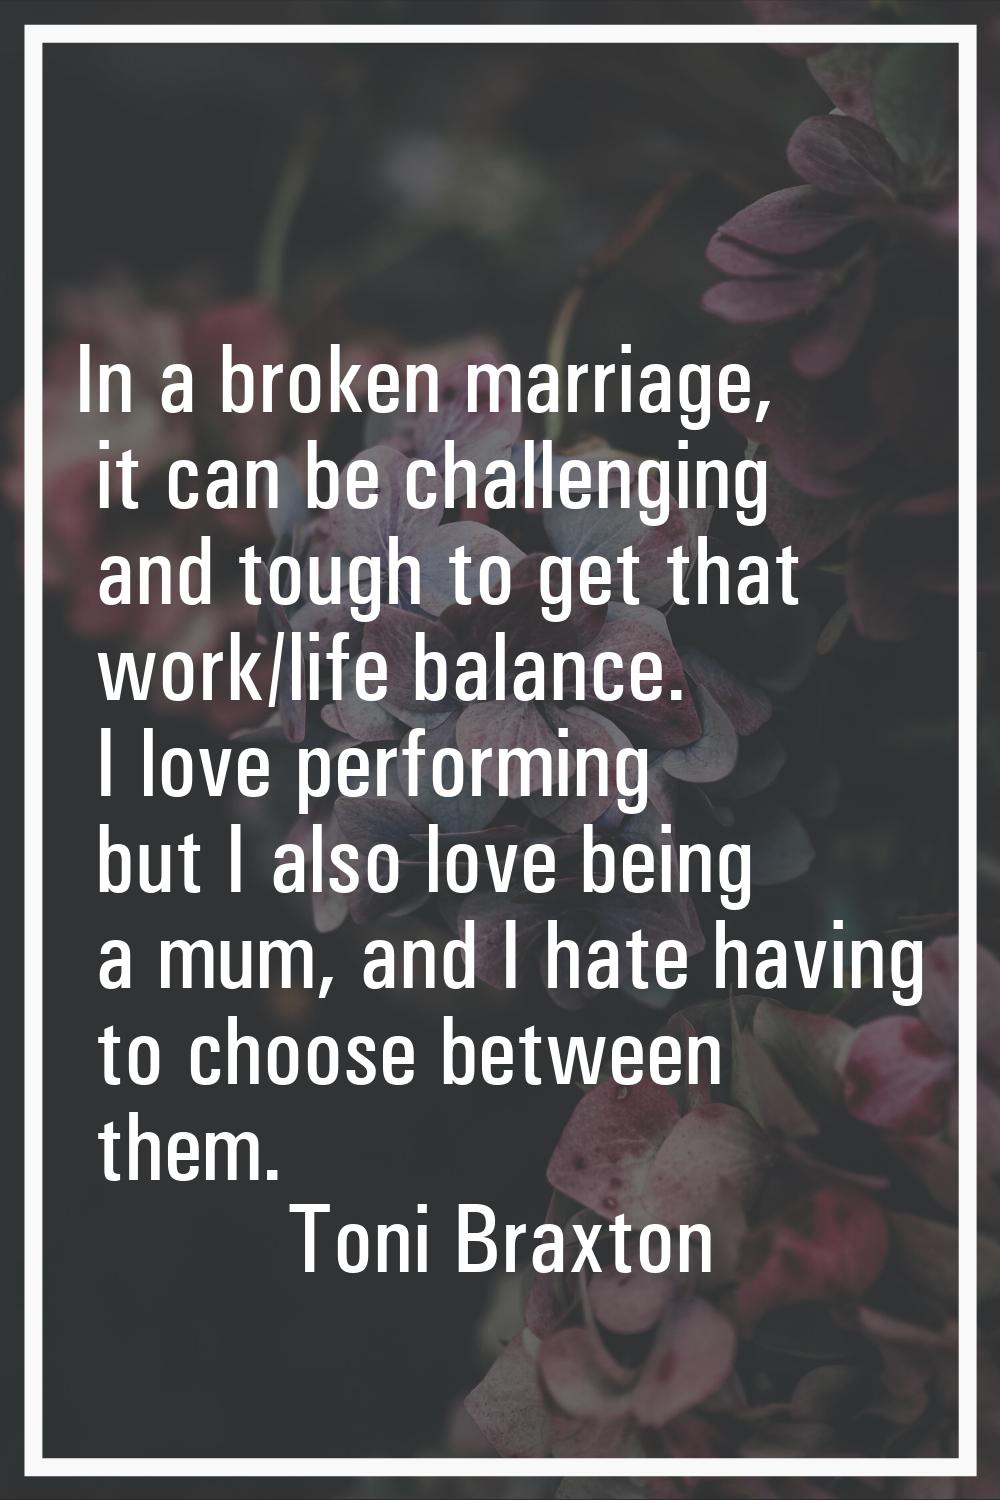 In a broken marriage, it can be challenging and tough to get that work/life balance. I love perform